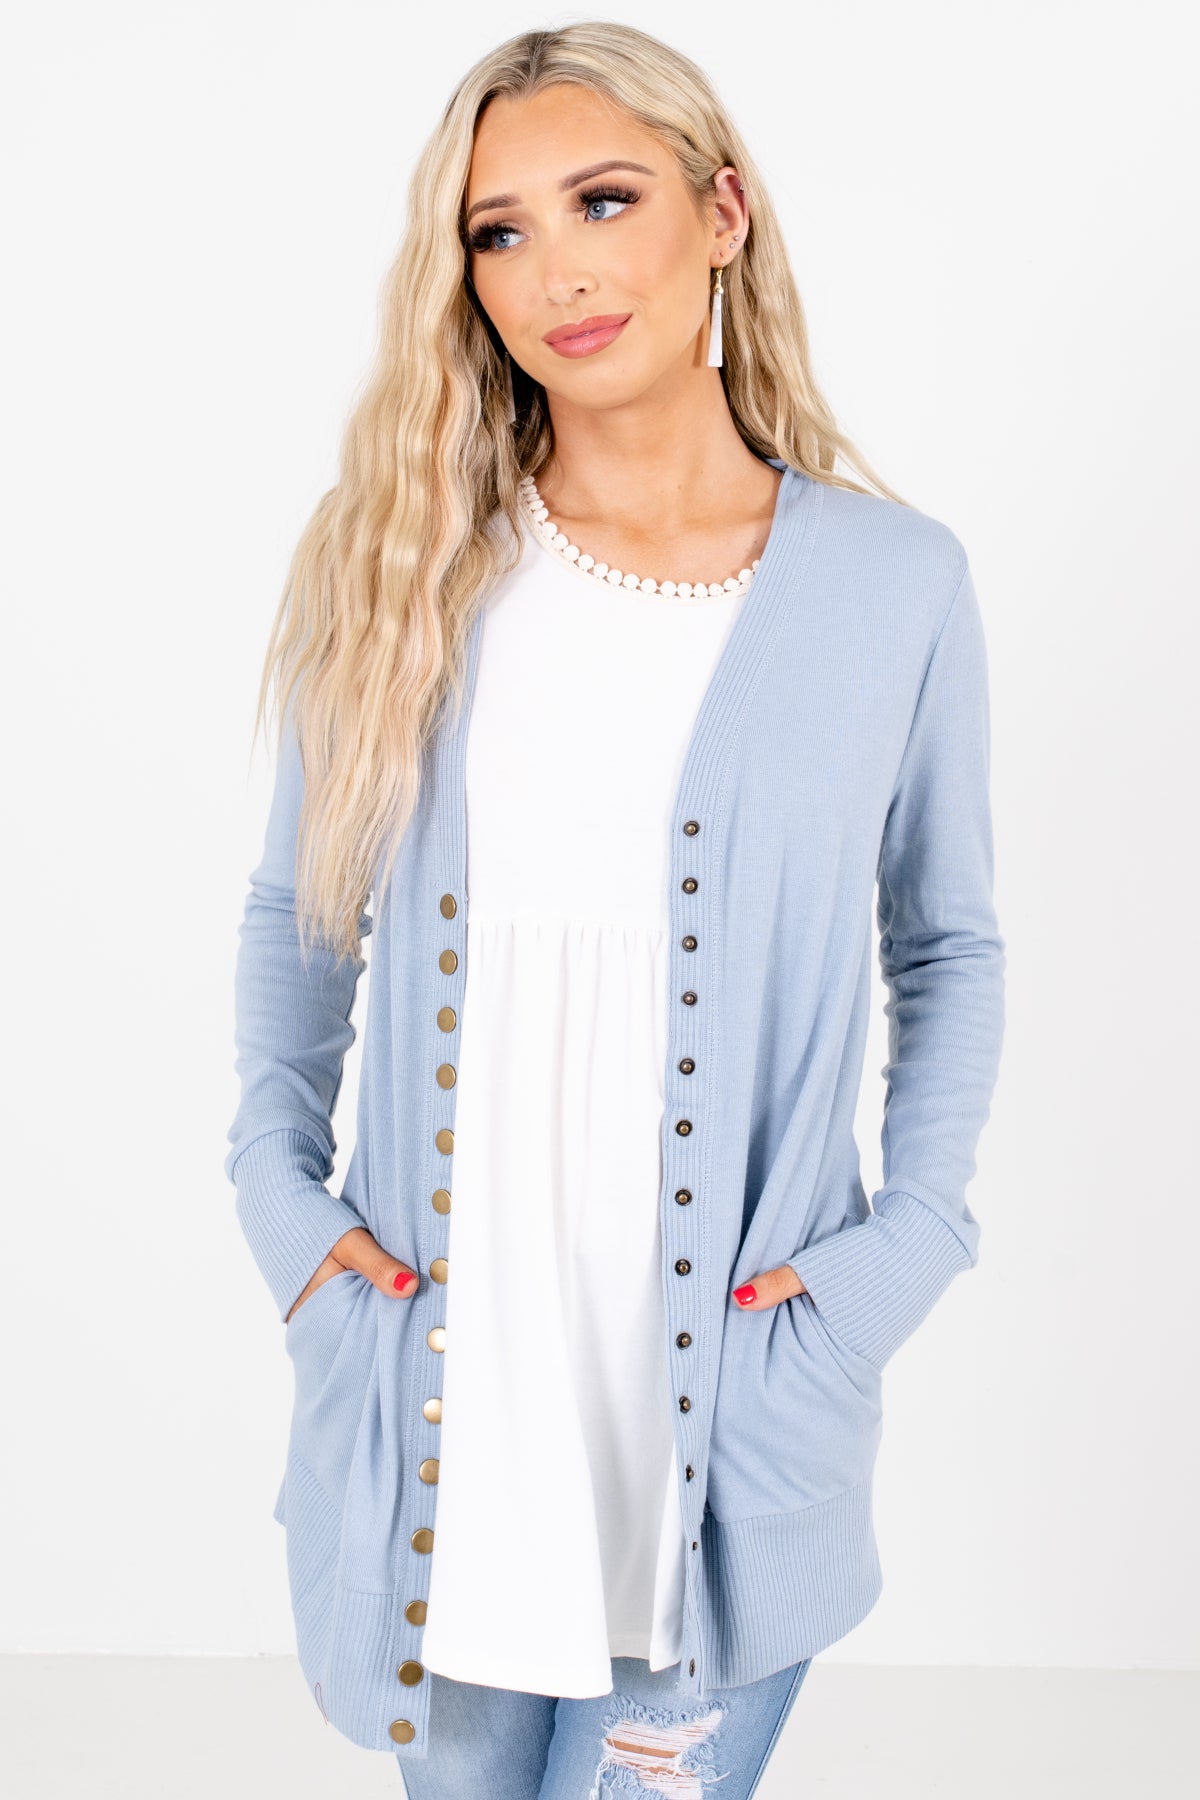 Women's Cardigan with Snap Buttons in Periwinkle